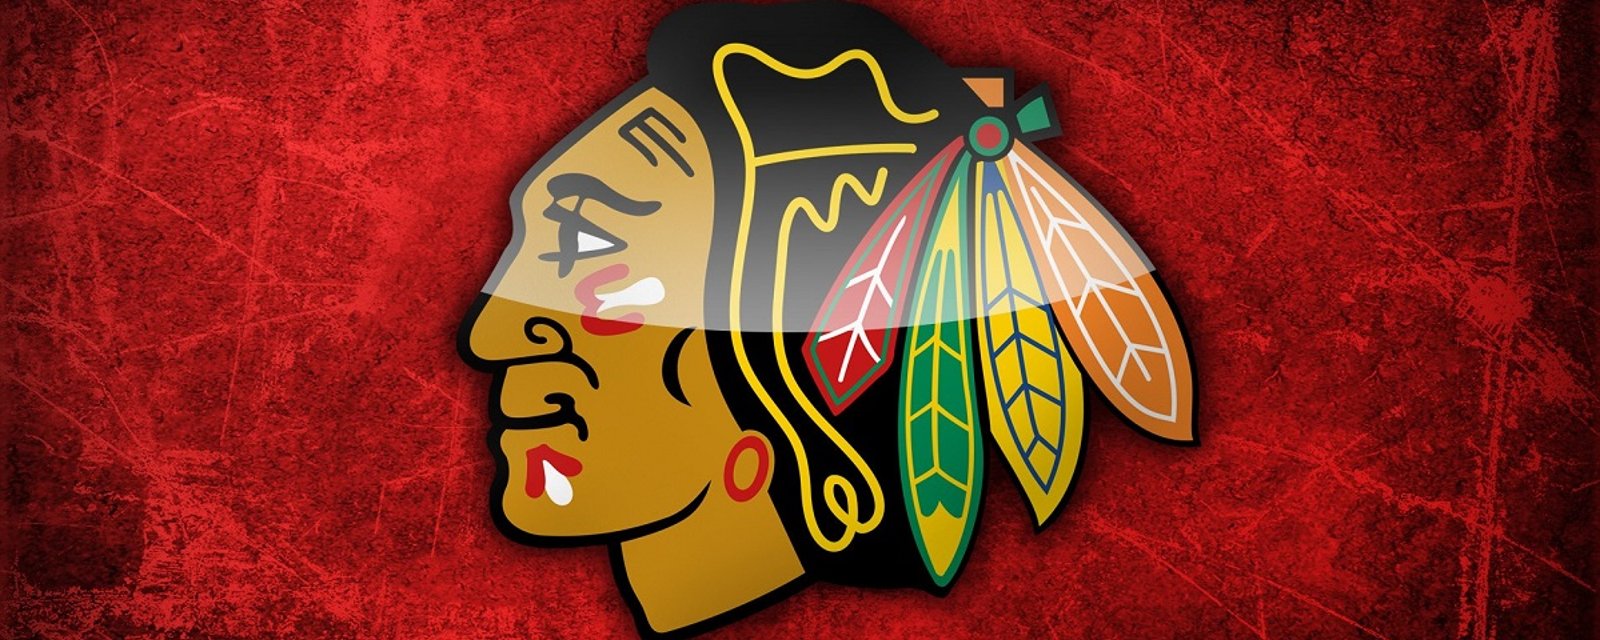 Breaking: Blackhawks expected to trade “core” player very soon.